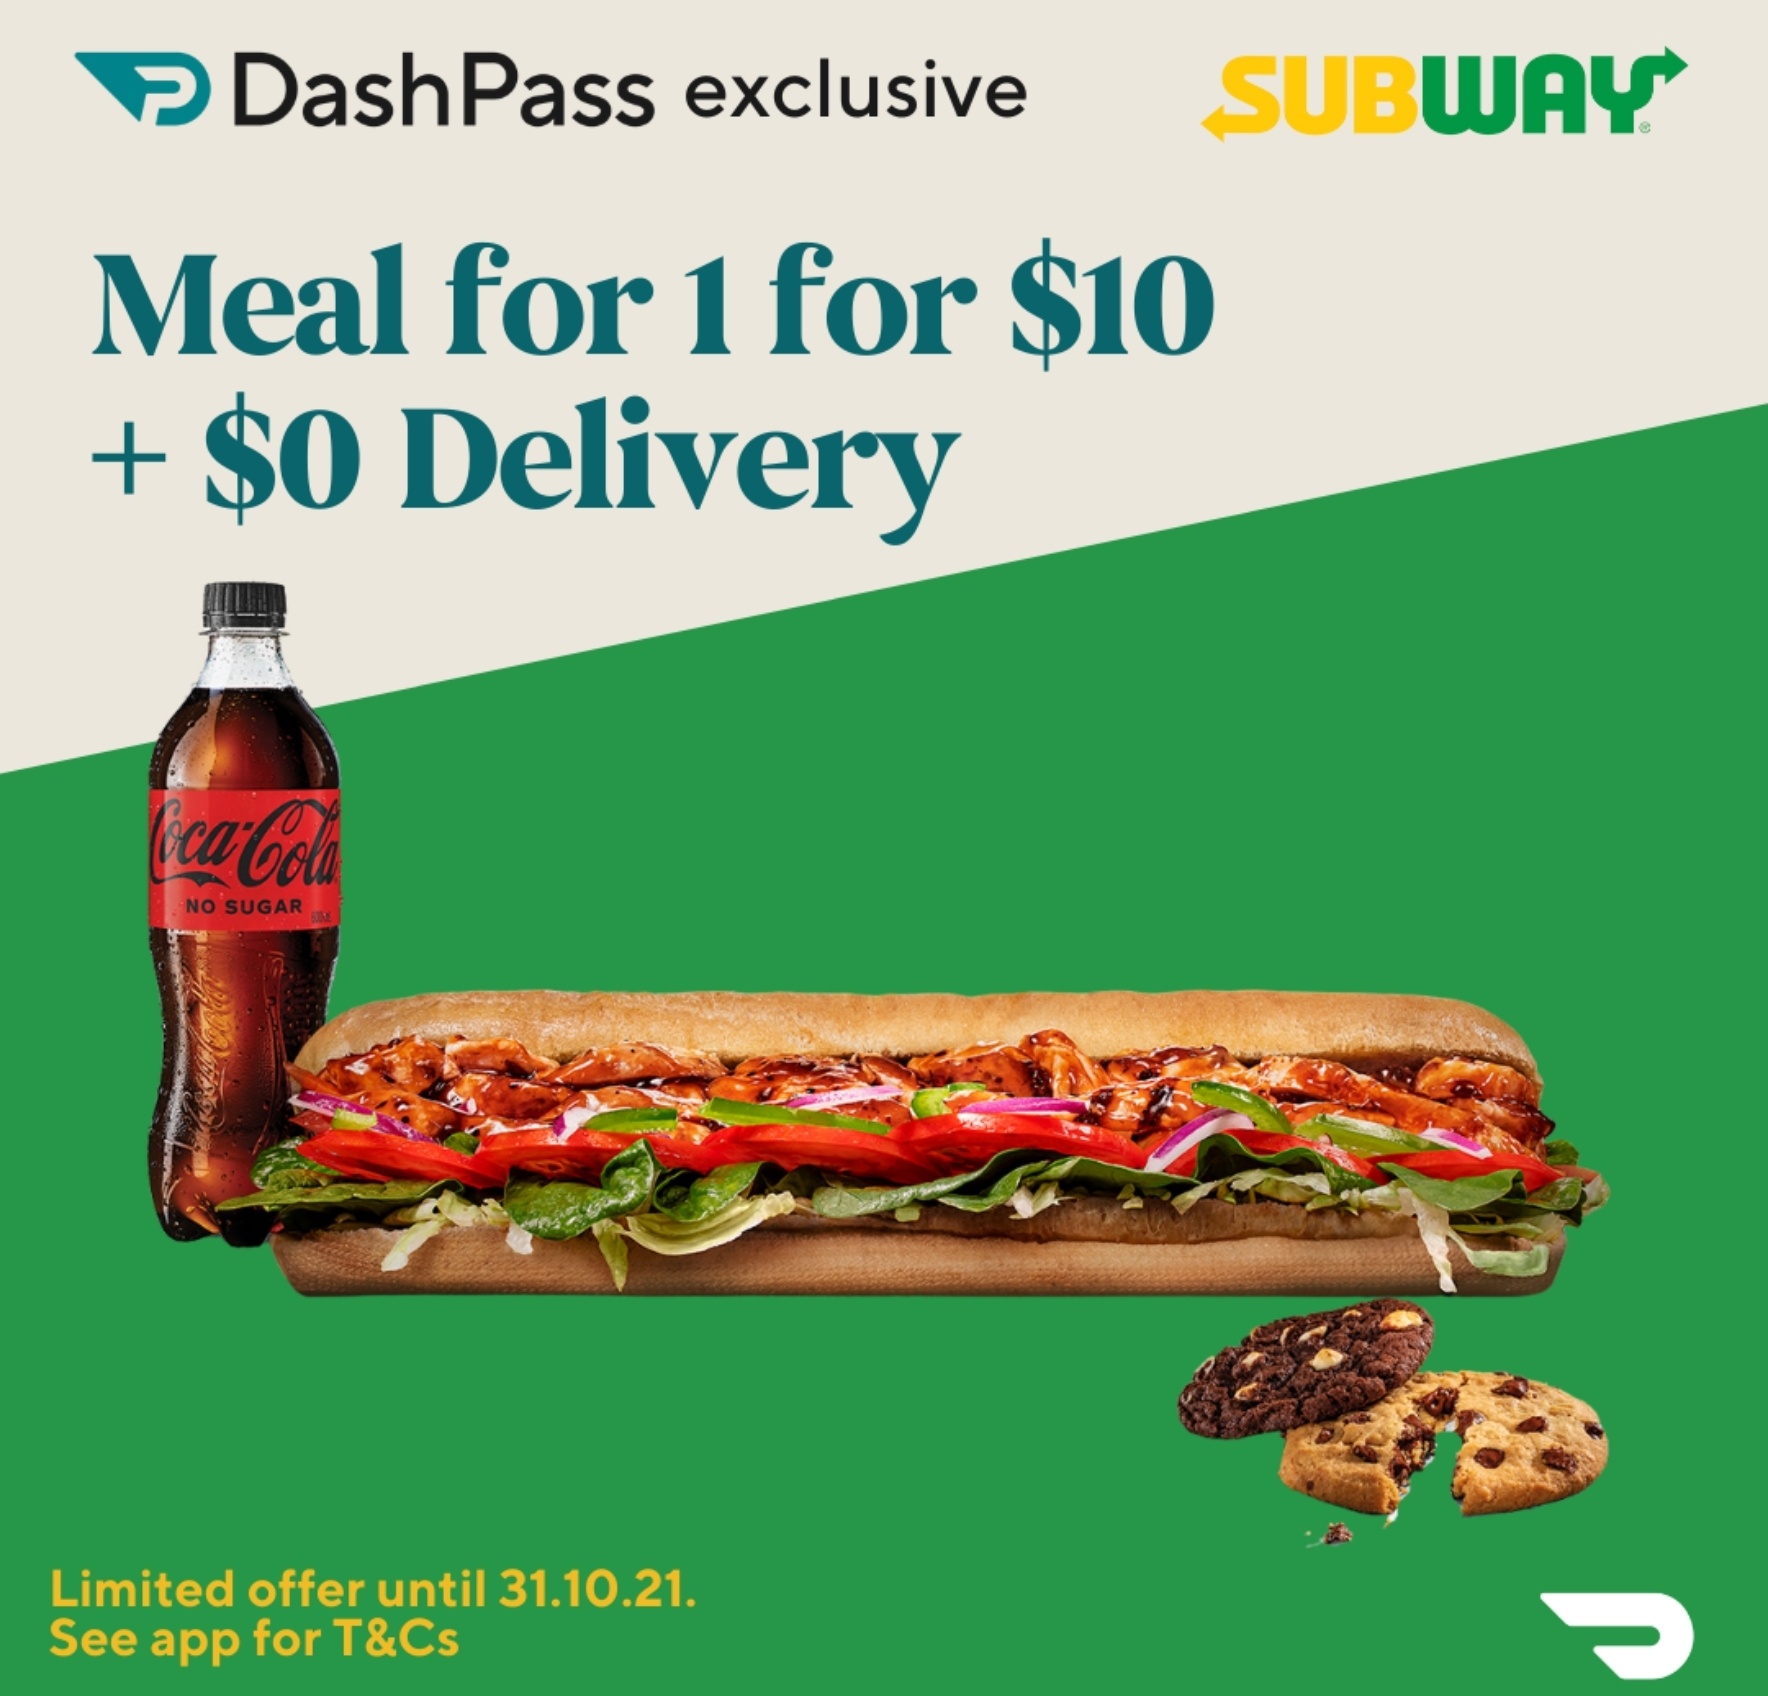 DEAL Subway 10 Meal for One Delivered for DoorDash DashPass Members